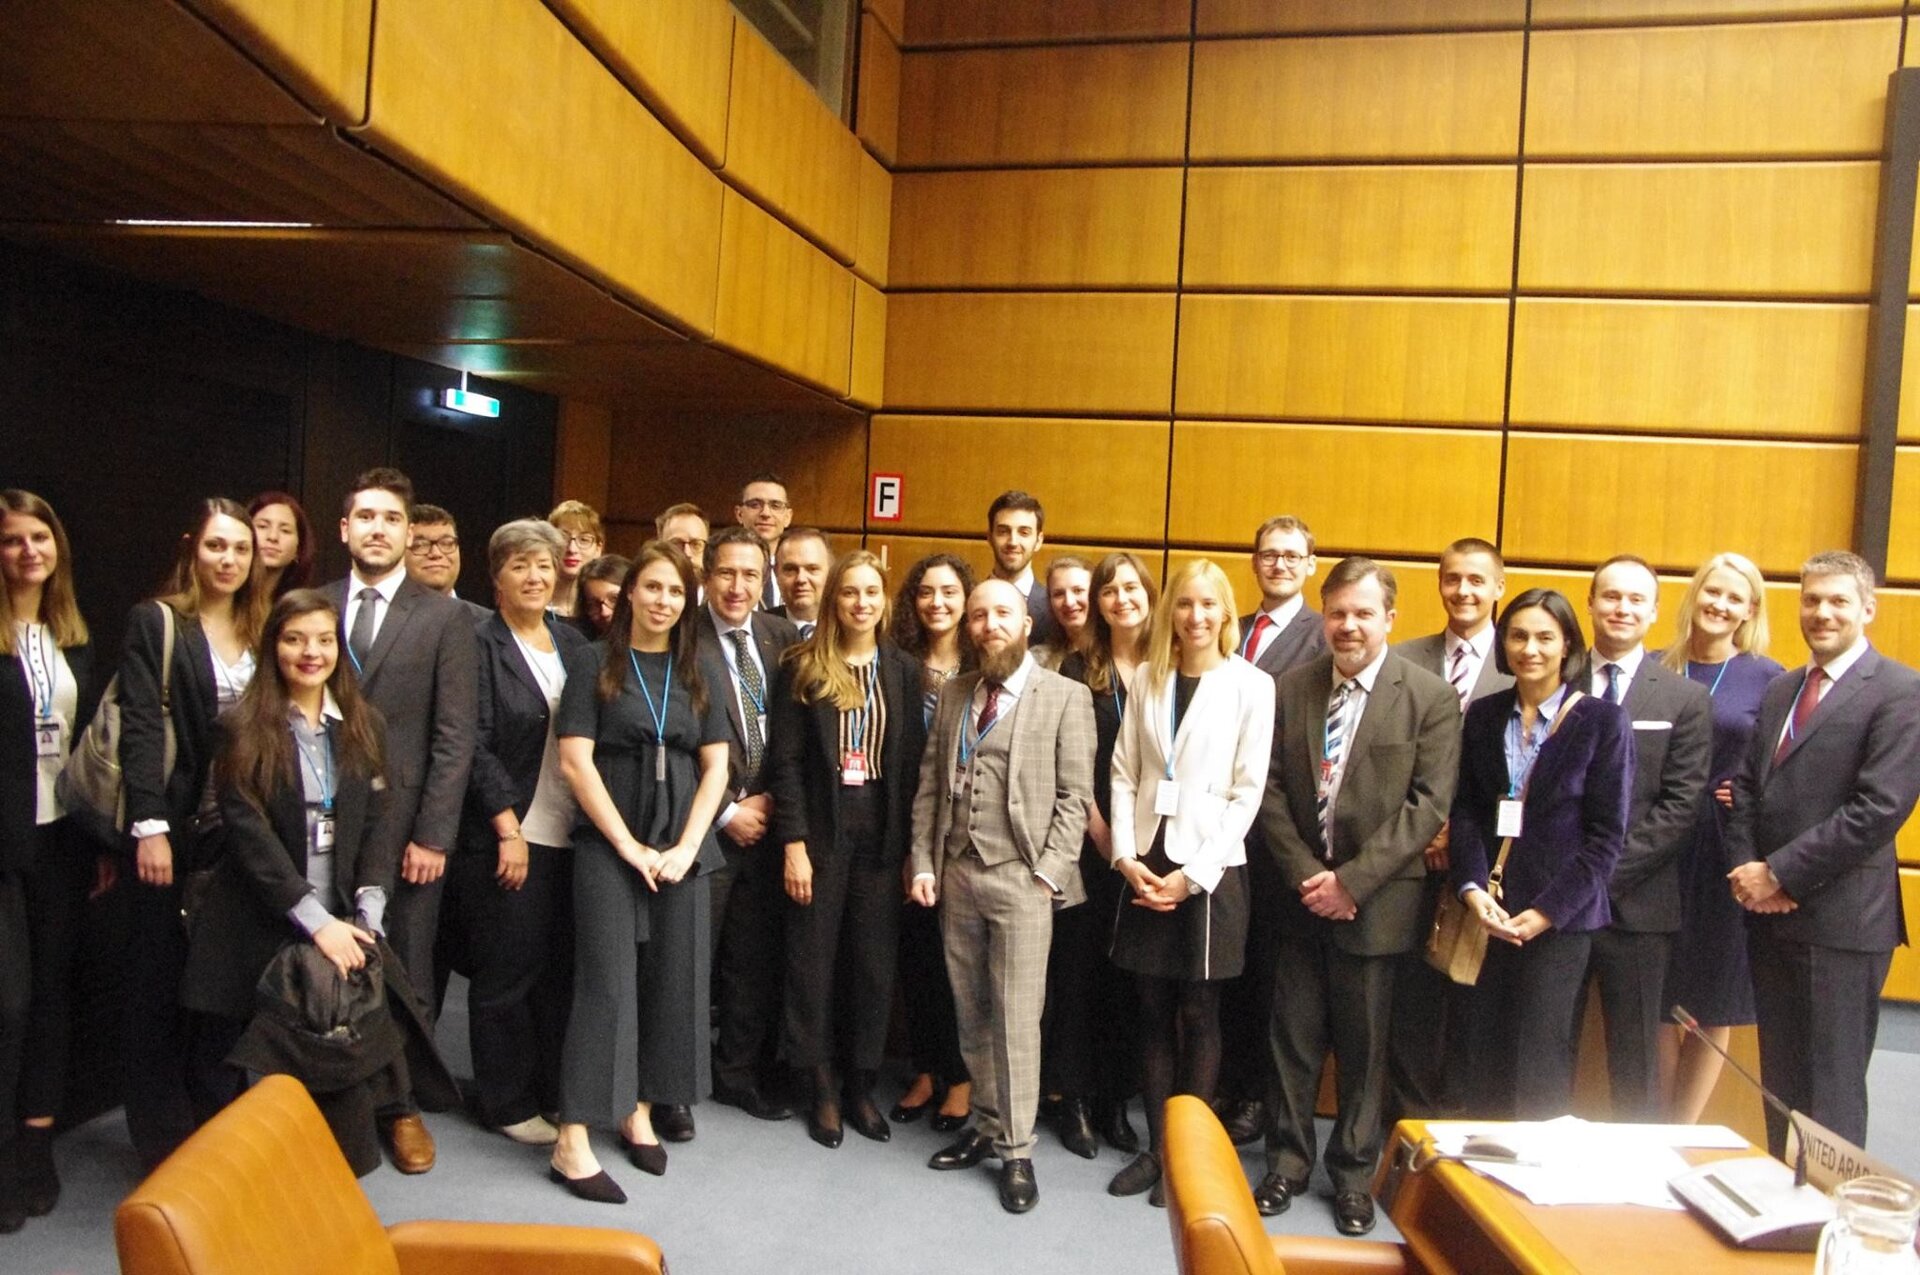 Some of the members of the ECSL present at the COPUOS LSC 2018